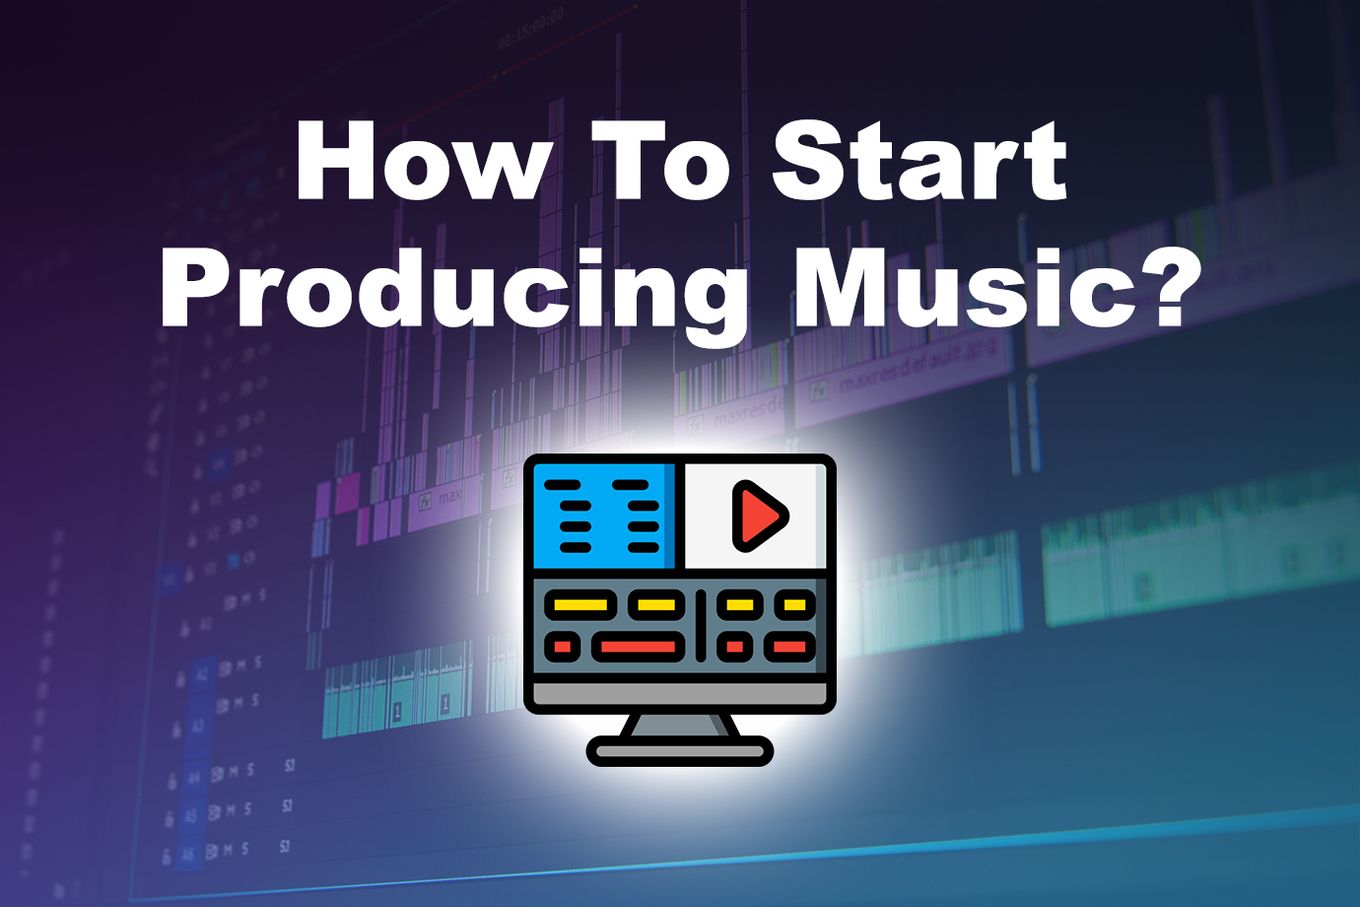 How To Start Producing Music?